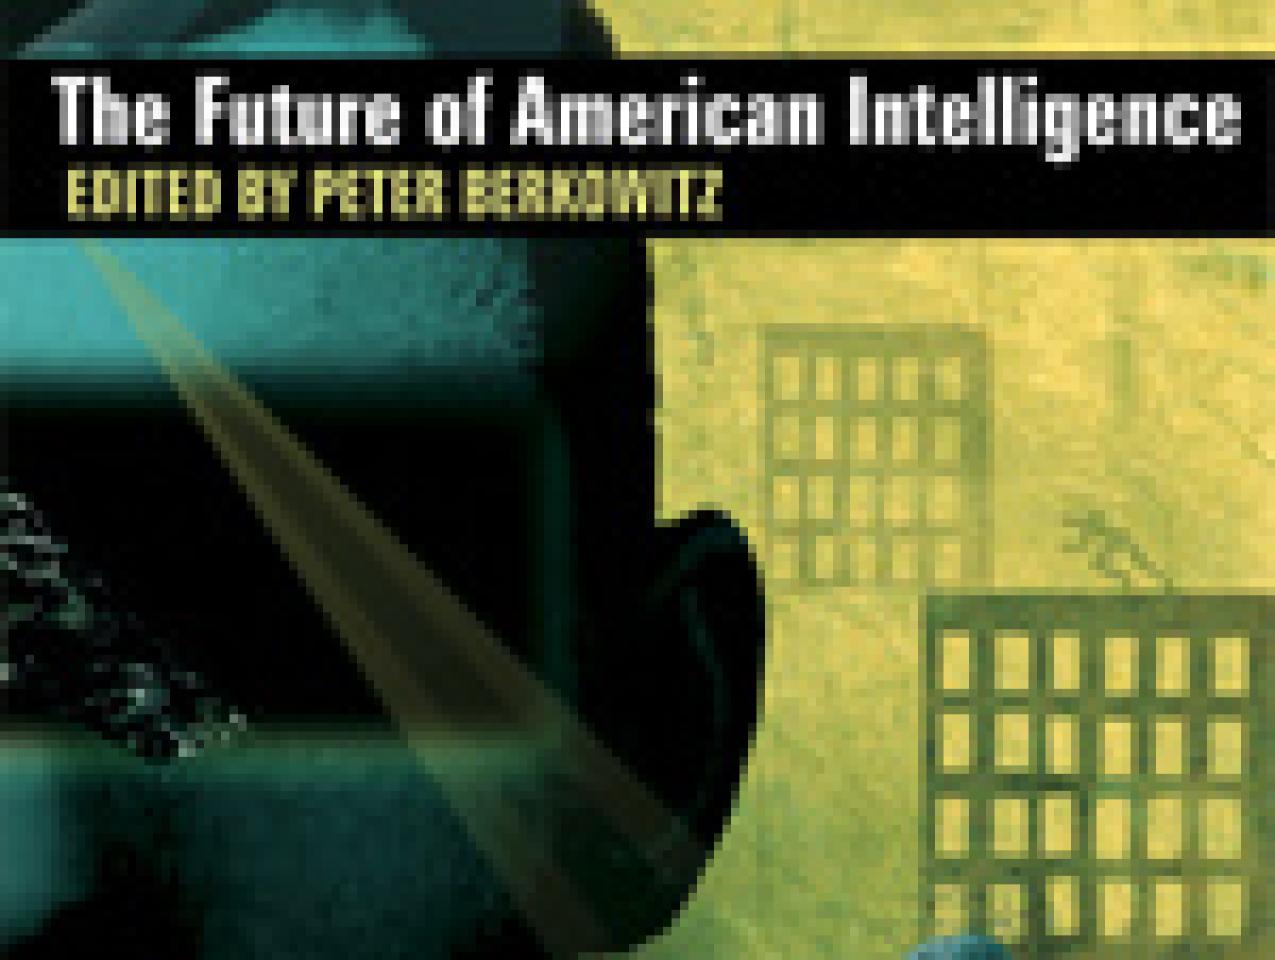 The Future of American Intelligence